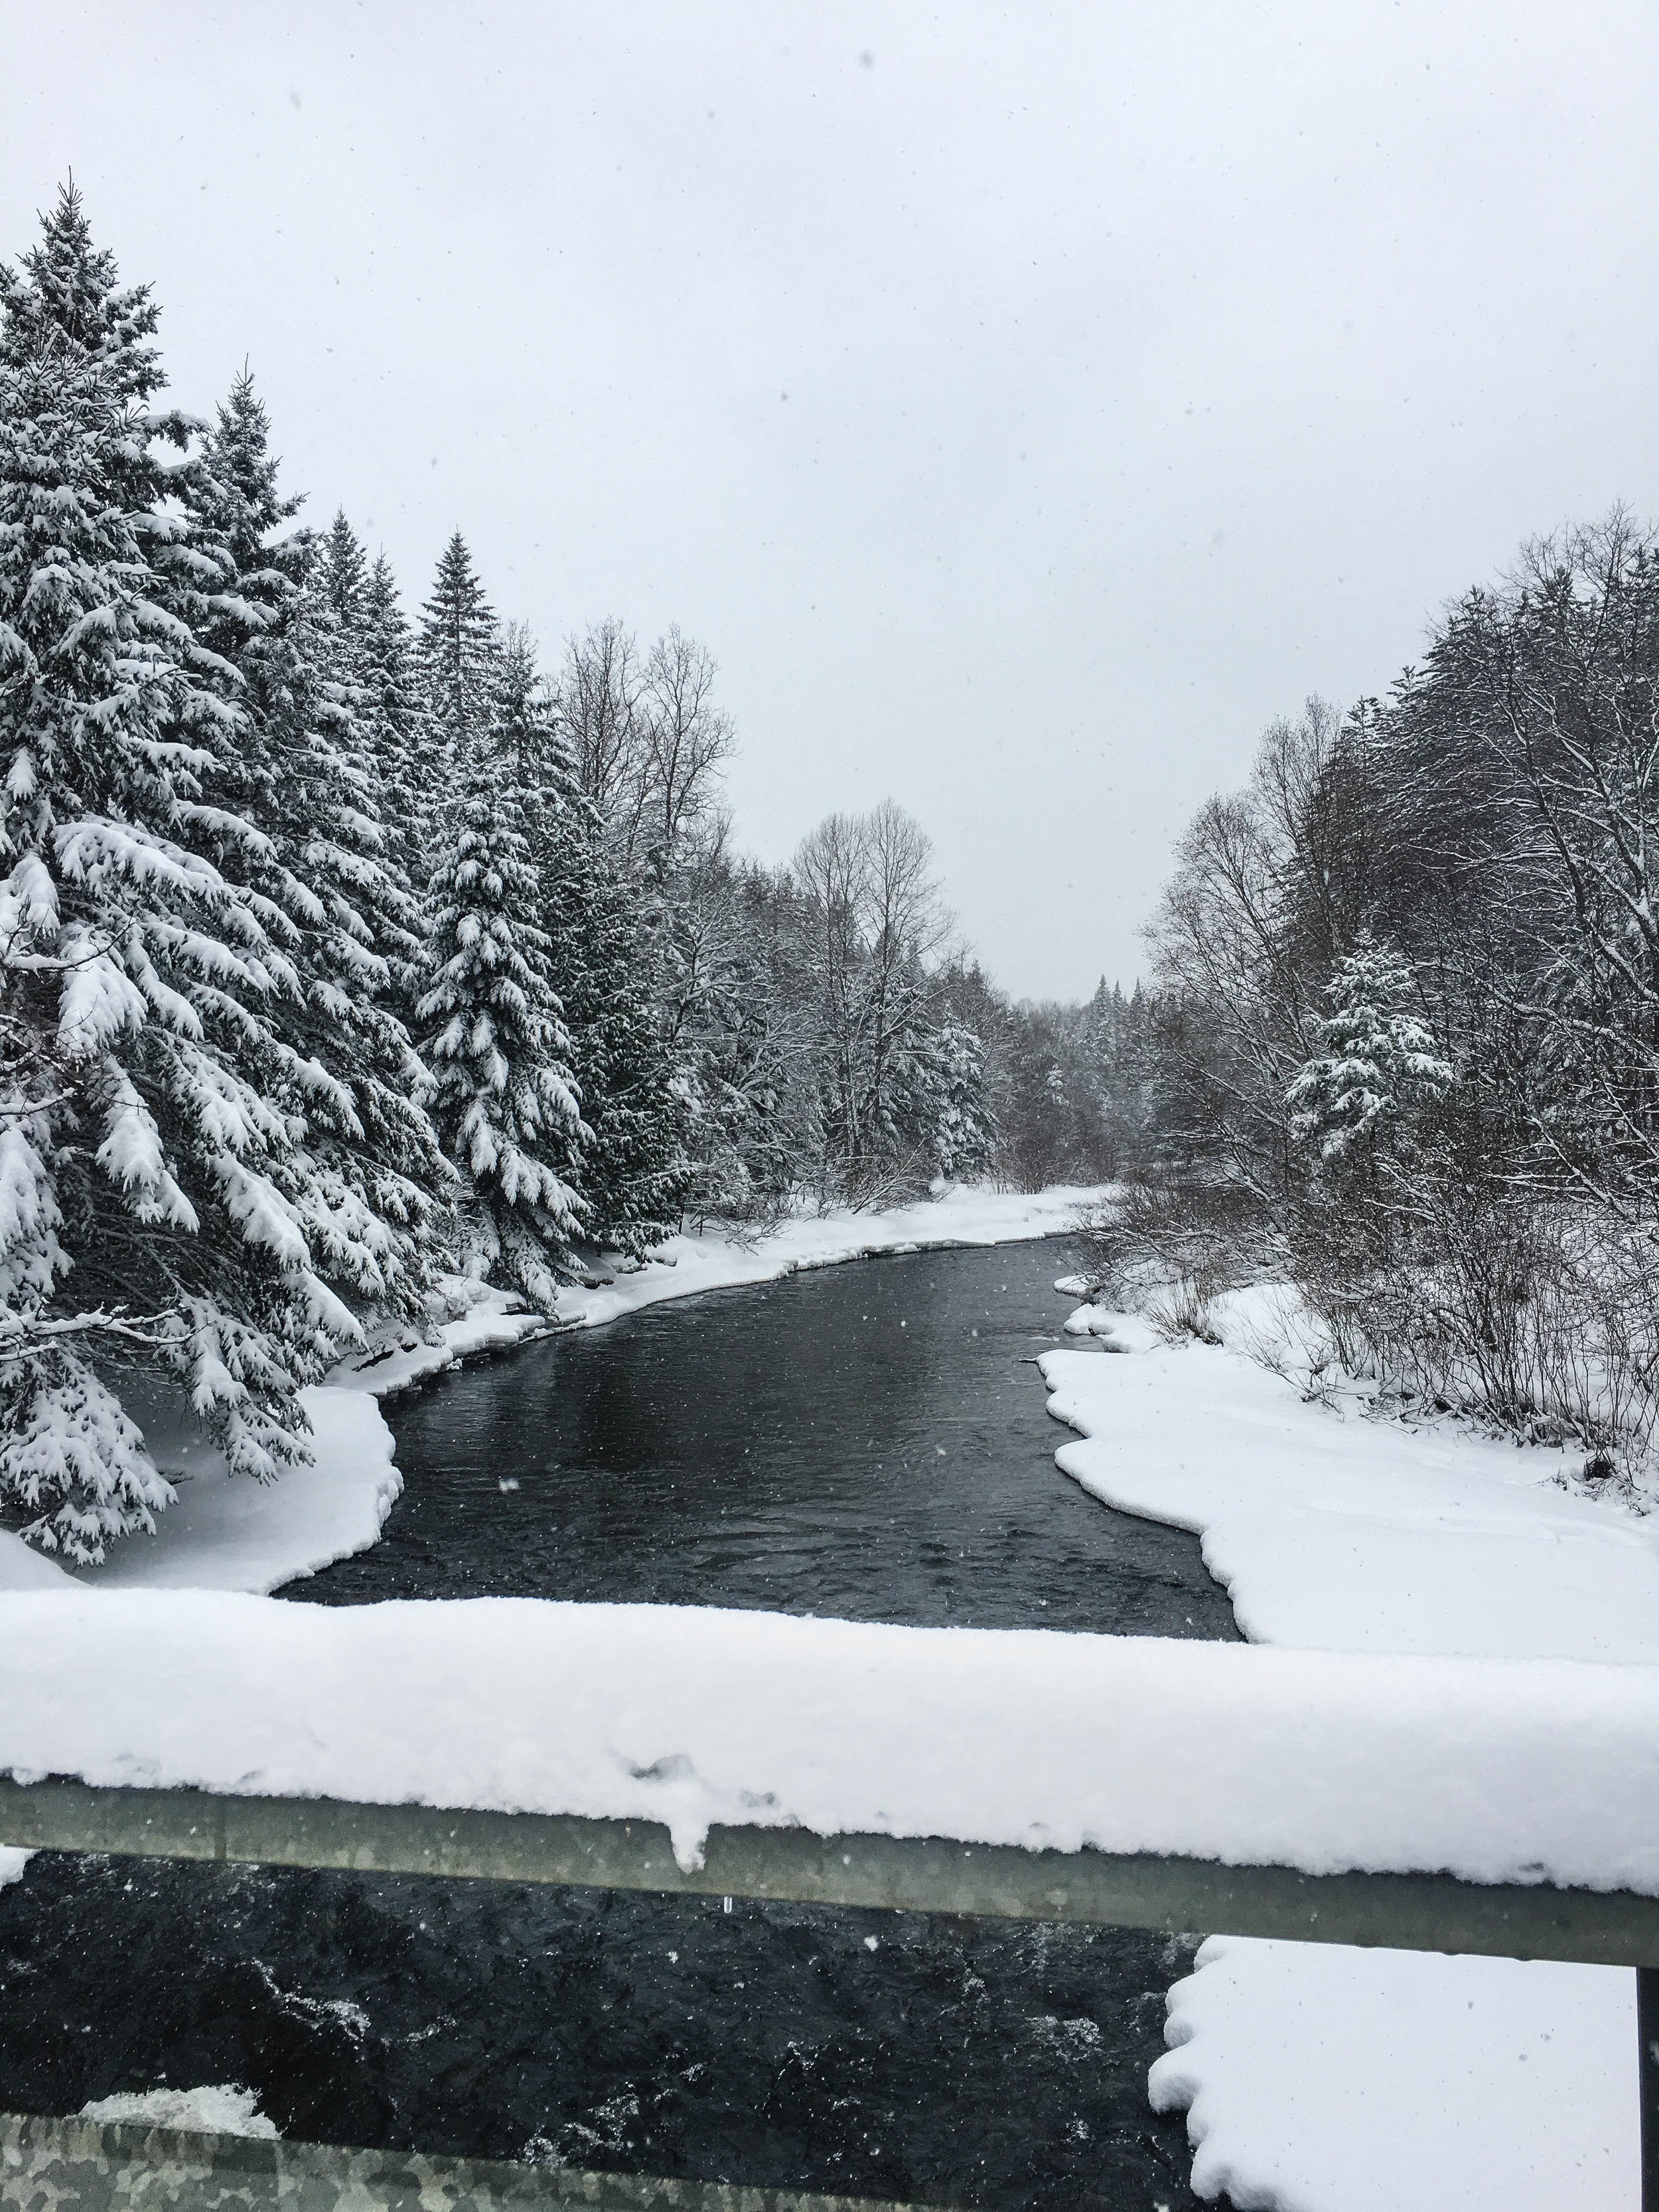 Walk in the mountains in Coaticook. There is a river, evergreens and a lot of snow